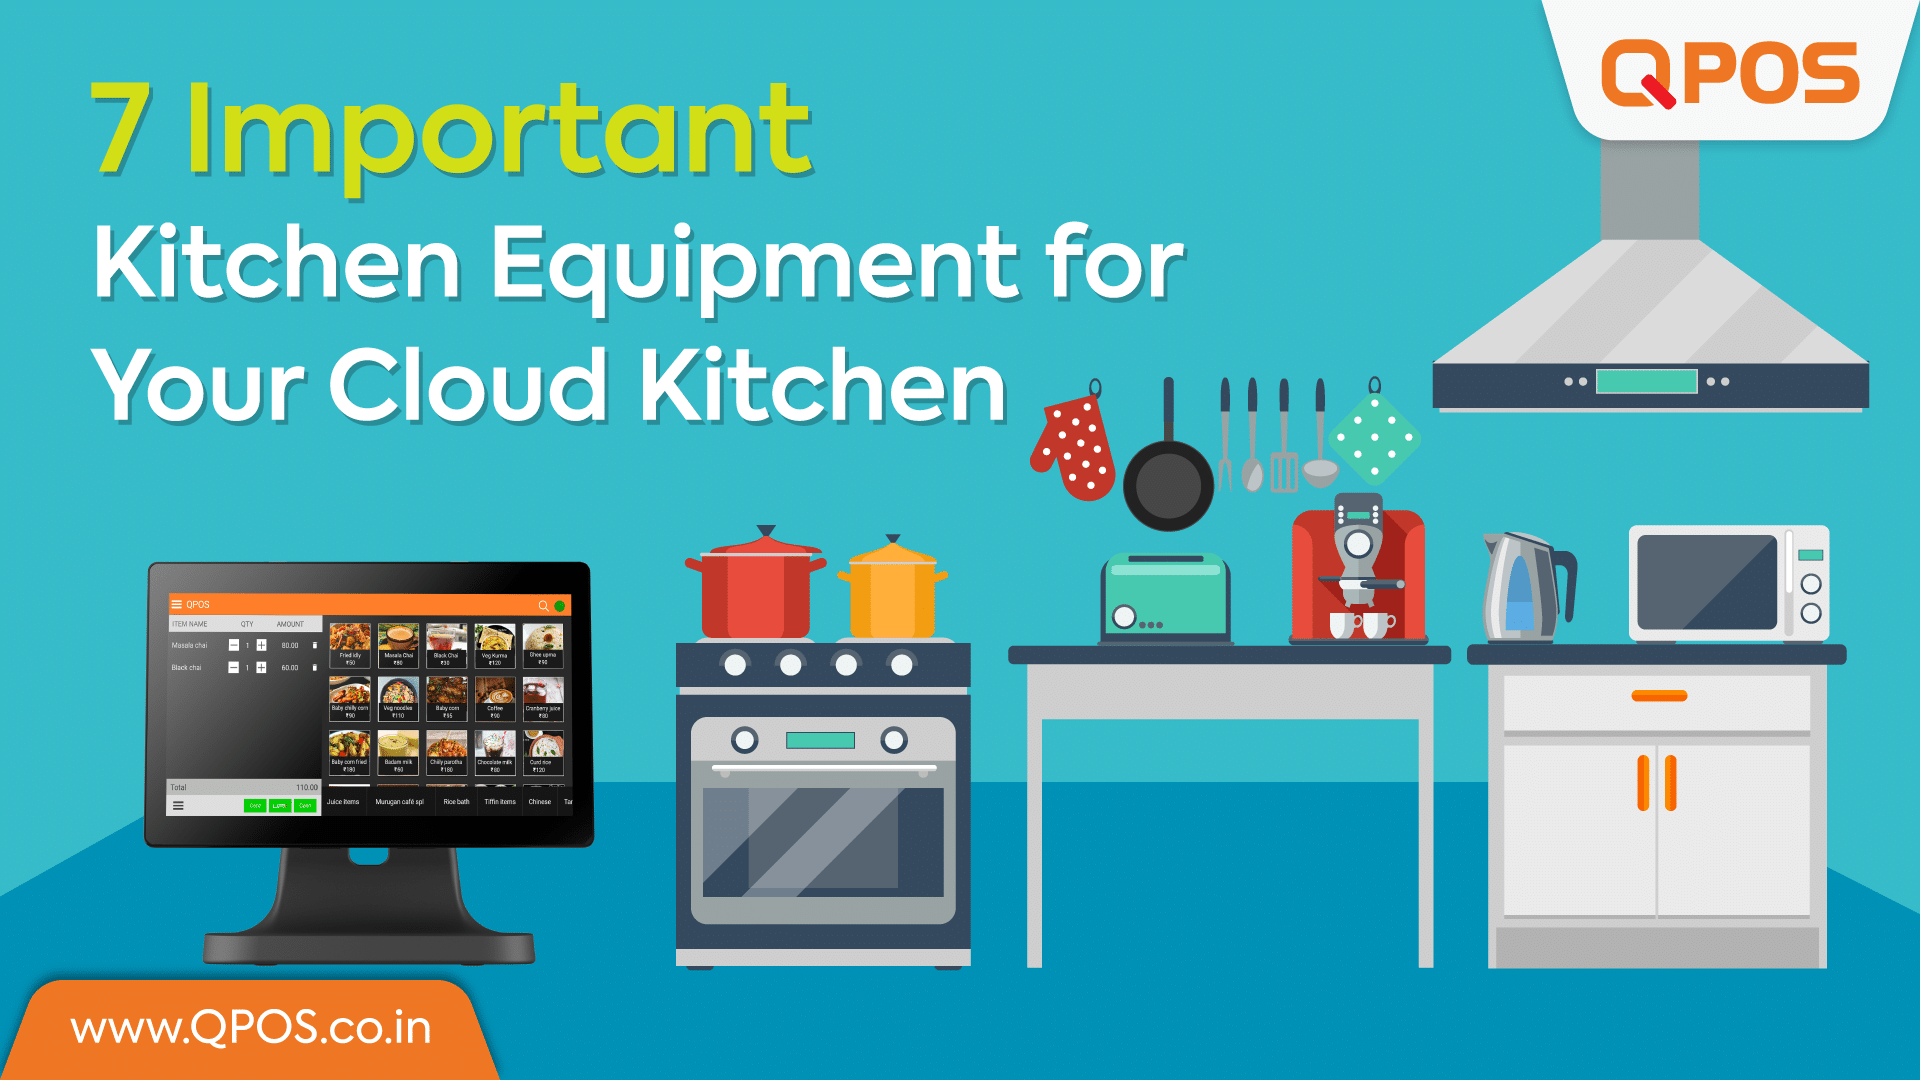 7 Important Kitchen Equipment for Your Cloud Kitchen